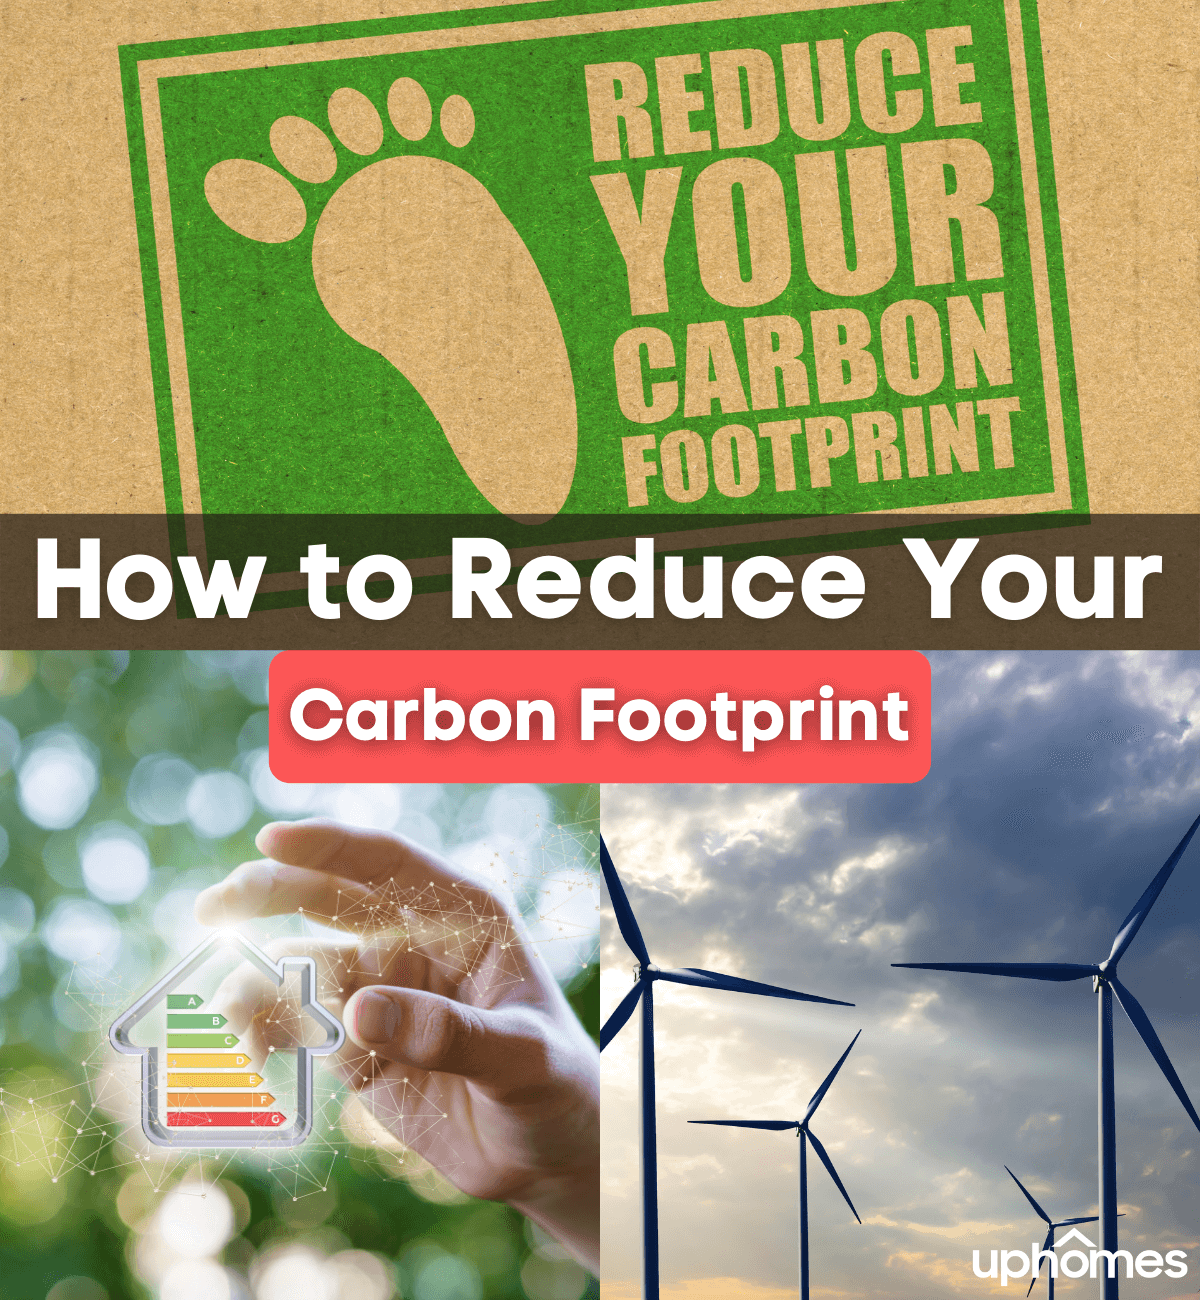 Energy Efficient Homes - How to Reduce your Carbon Footprint with Co2 footprint on a mat and photo of windmills and energy efficient homes